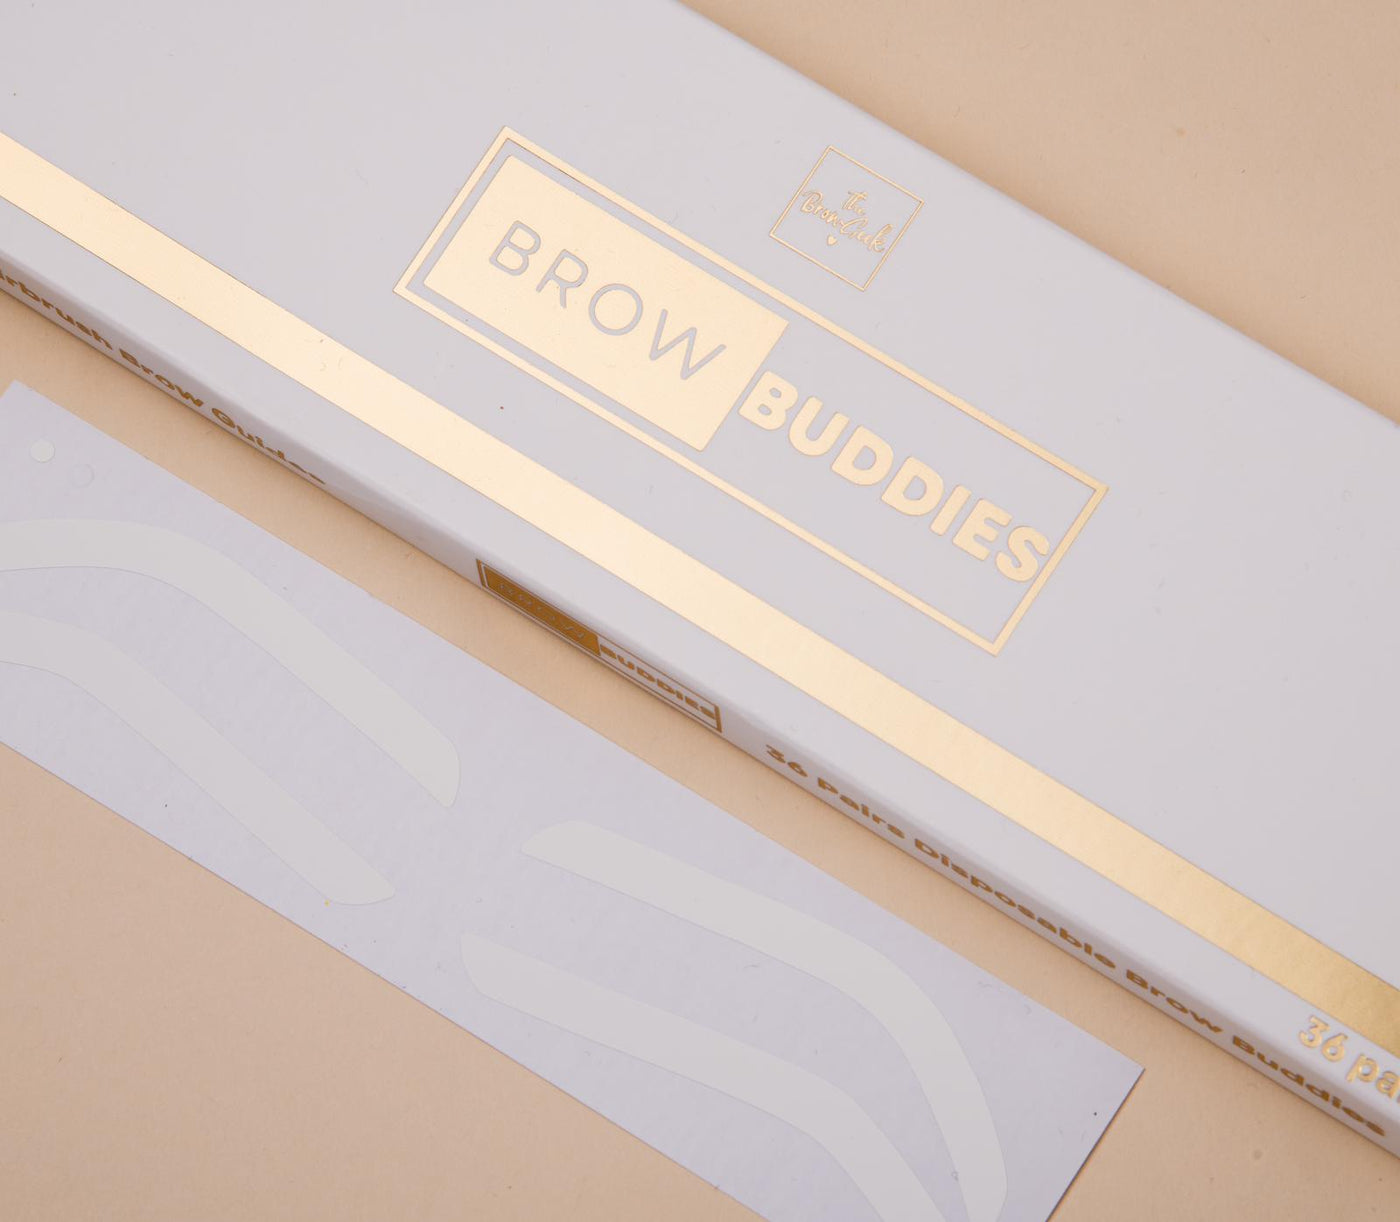 BROW BUDDIES ™ - 36 pairs of the ultimate brow guides for Airbrushing or Hybrid